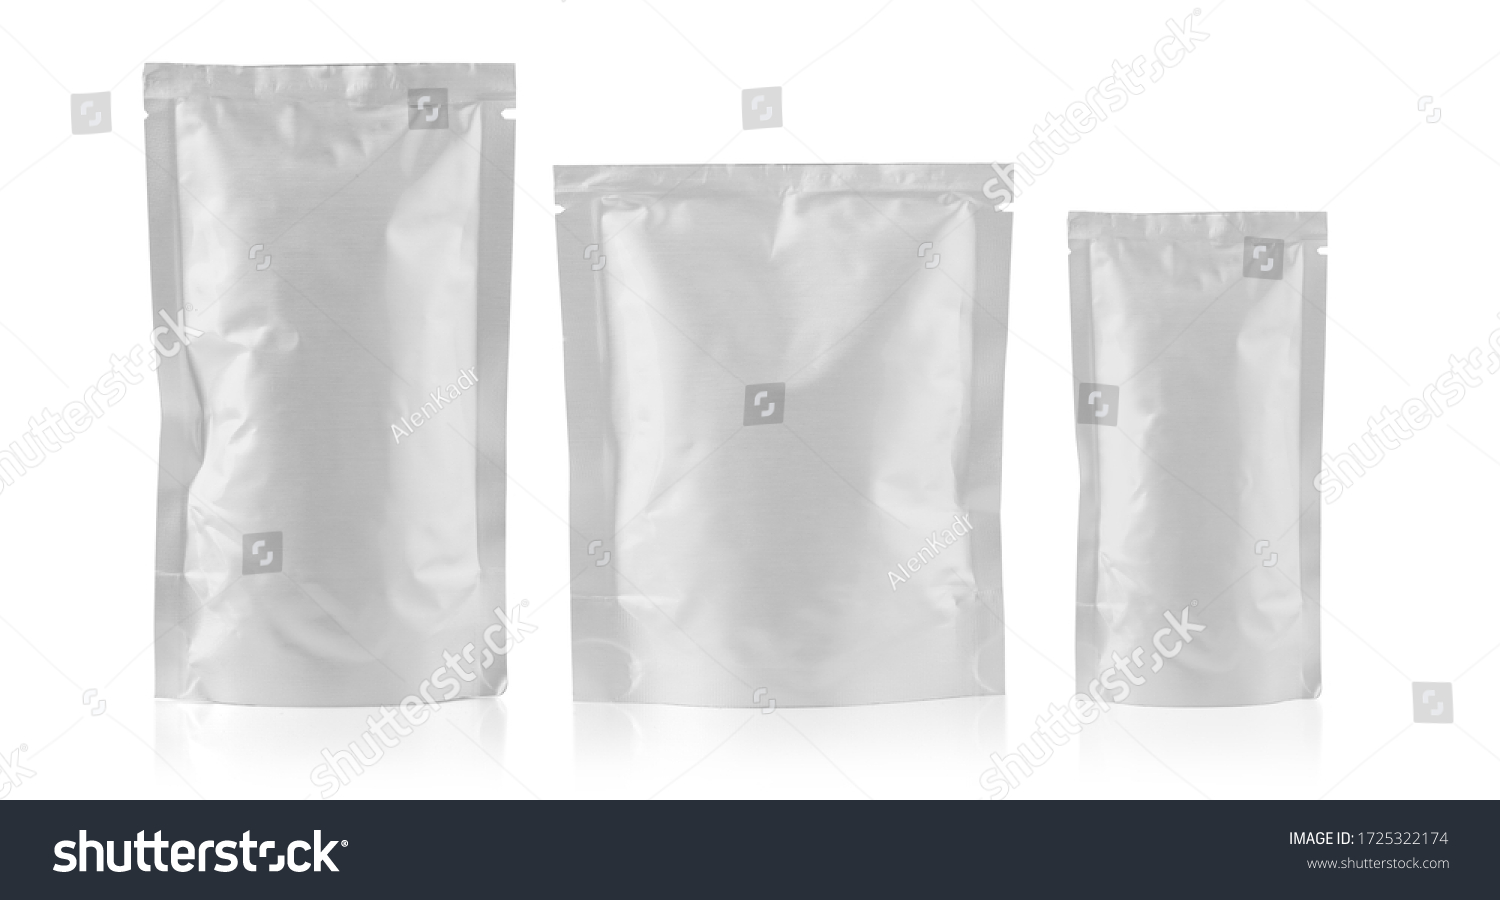 Mockup Stand Up Blank Bag white For Coffee, Candy, Nuts, Spices, Self-Seal Zip Lock Foil Or Paper Food Pouch Snack Sachet Resealable Packaging #1725322174